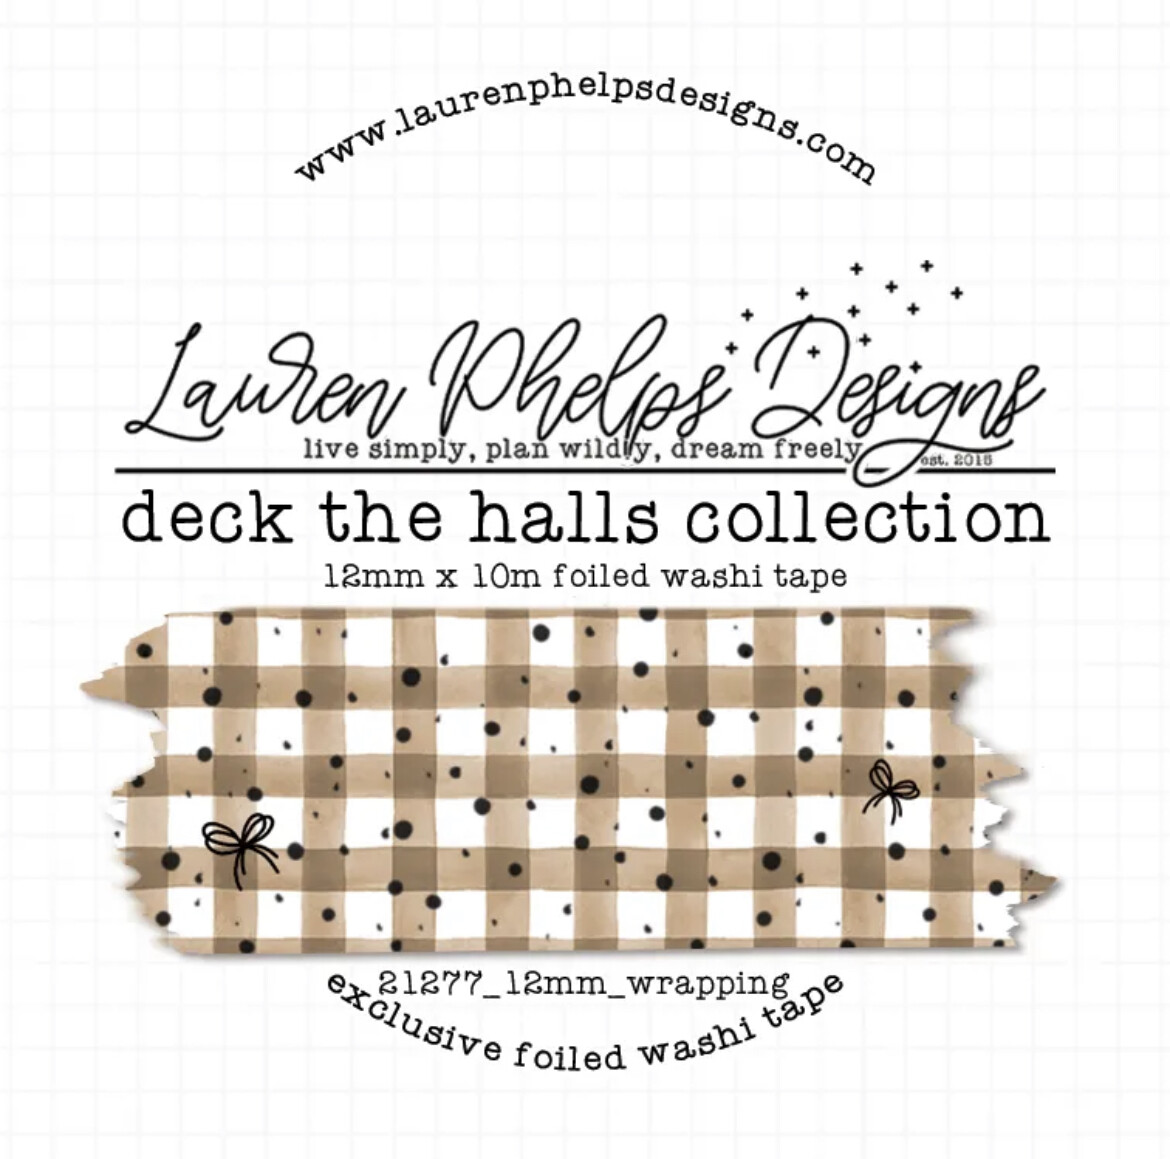 LAUREN PHELPS DESIGNS | DECK THE HALLS: WRAPPING FOILED WASHI, 12MM